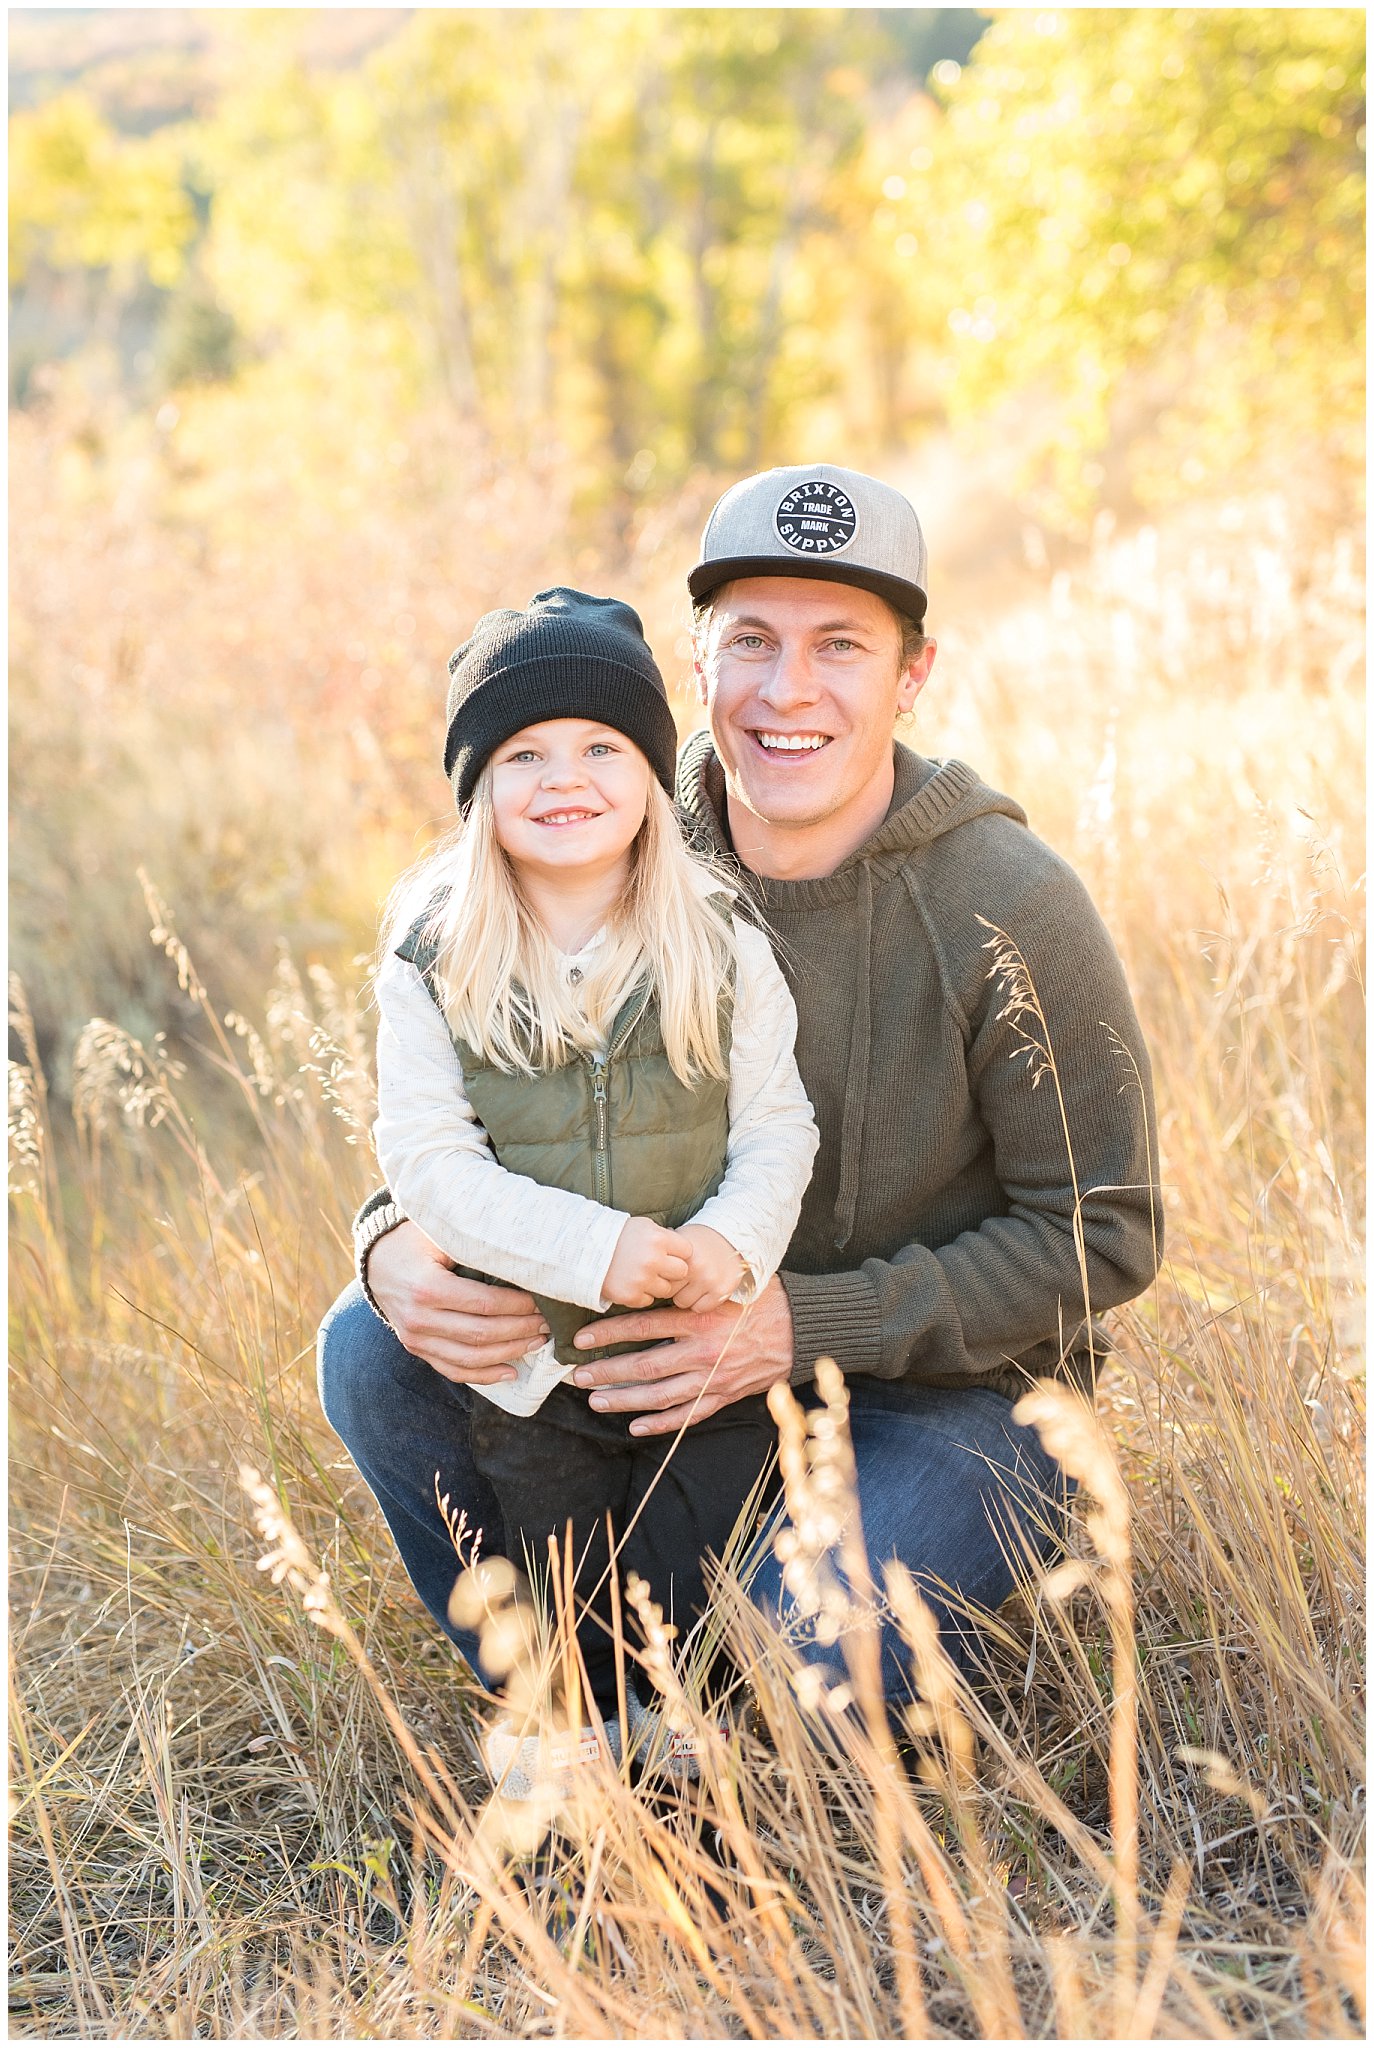 Father and son smiling at the camera at snowbasin in the fall | Fall Family Pictures in the Mountains | Snowbasin, Utah | Jessie and Dallin